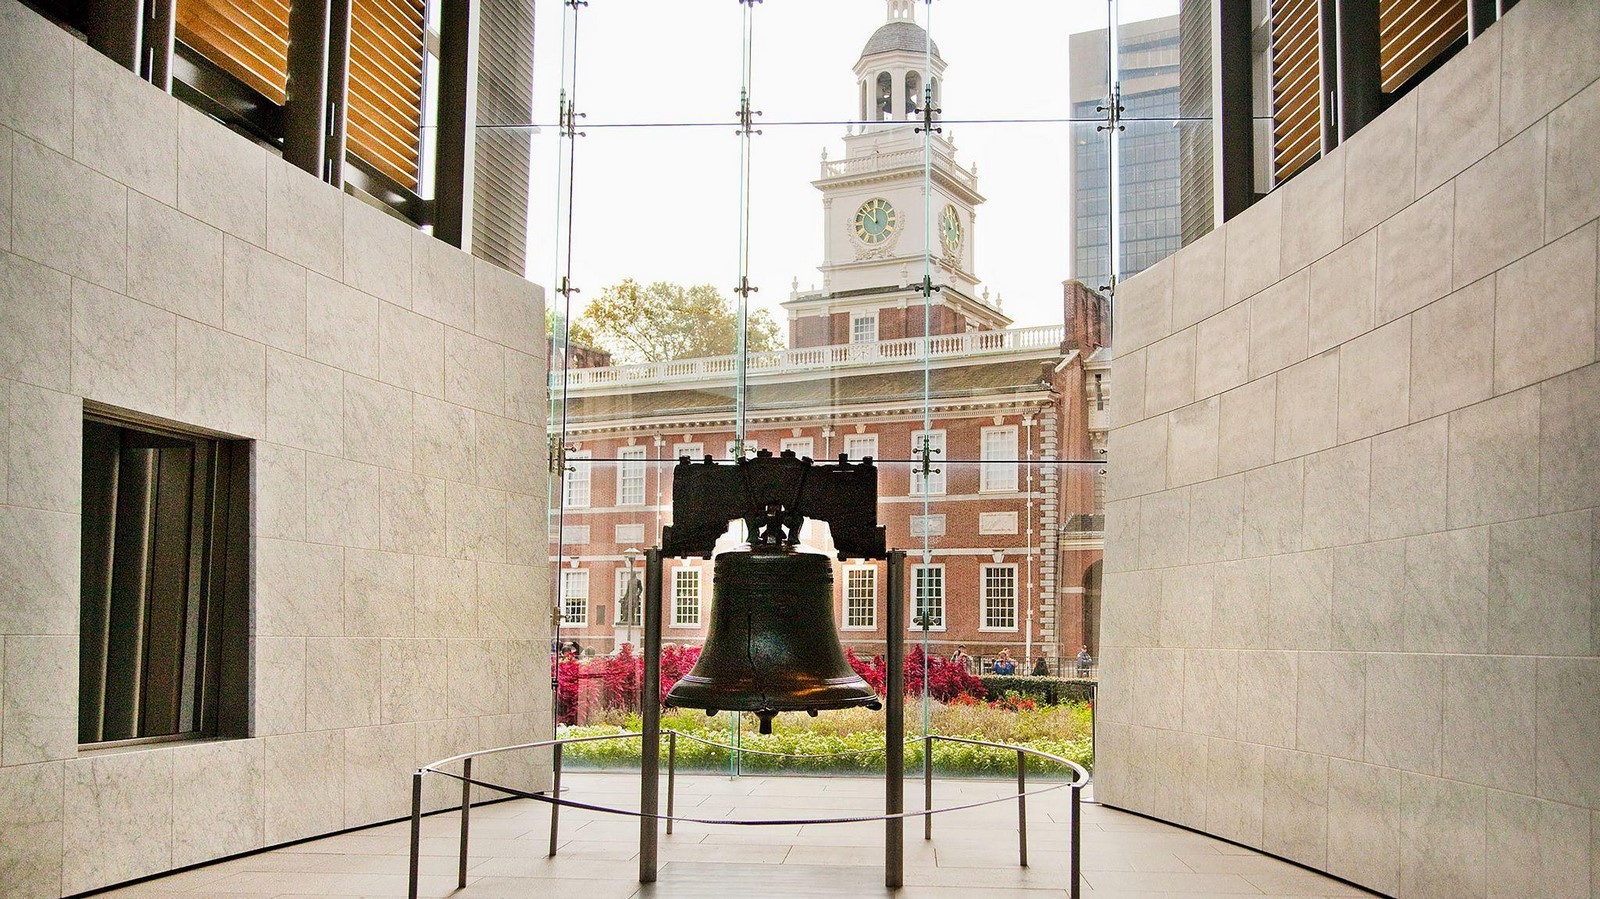 Buildings in Philadelphia: 15 Architectural Marvels Every Architect Must See - Sheet4